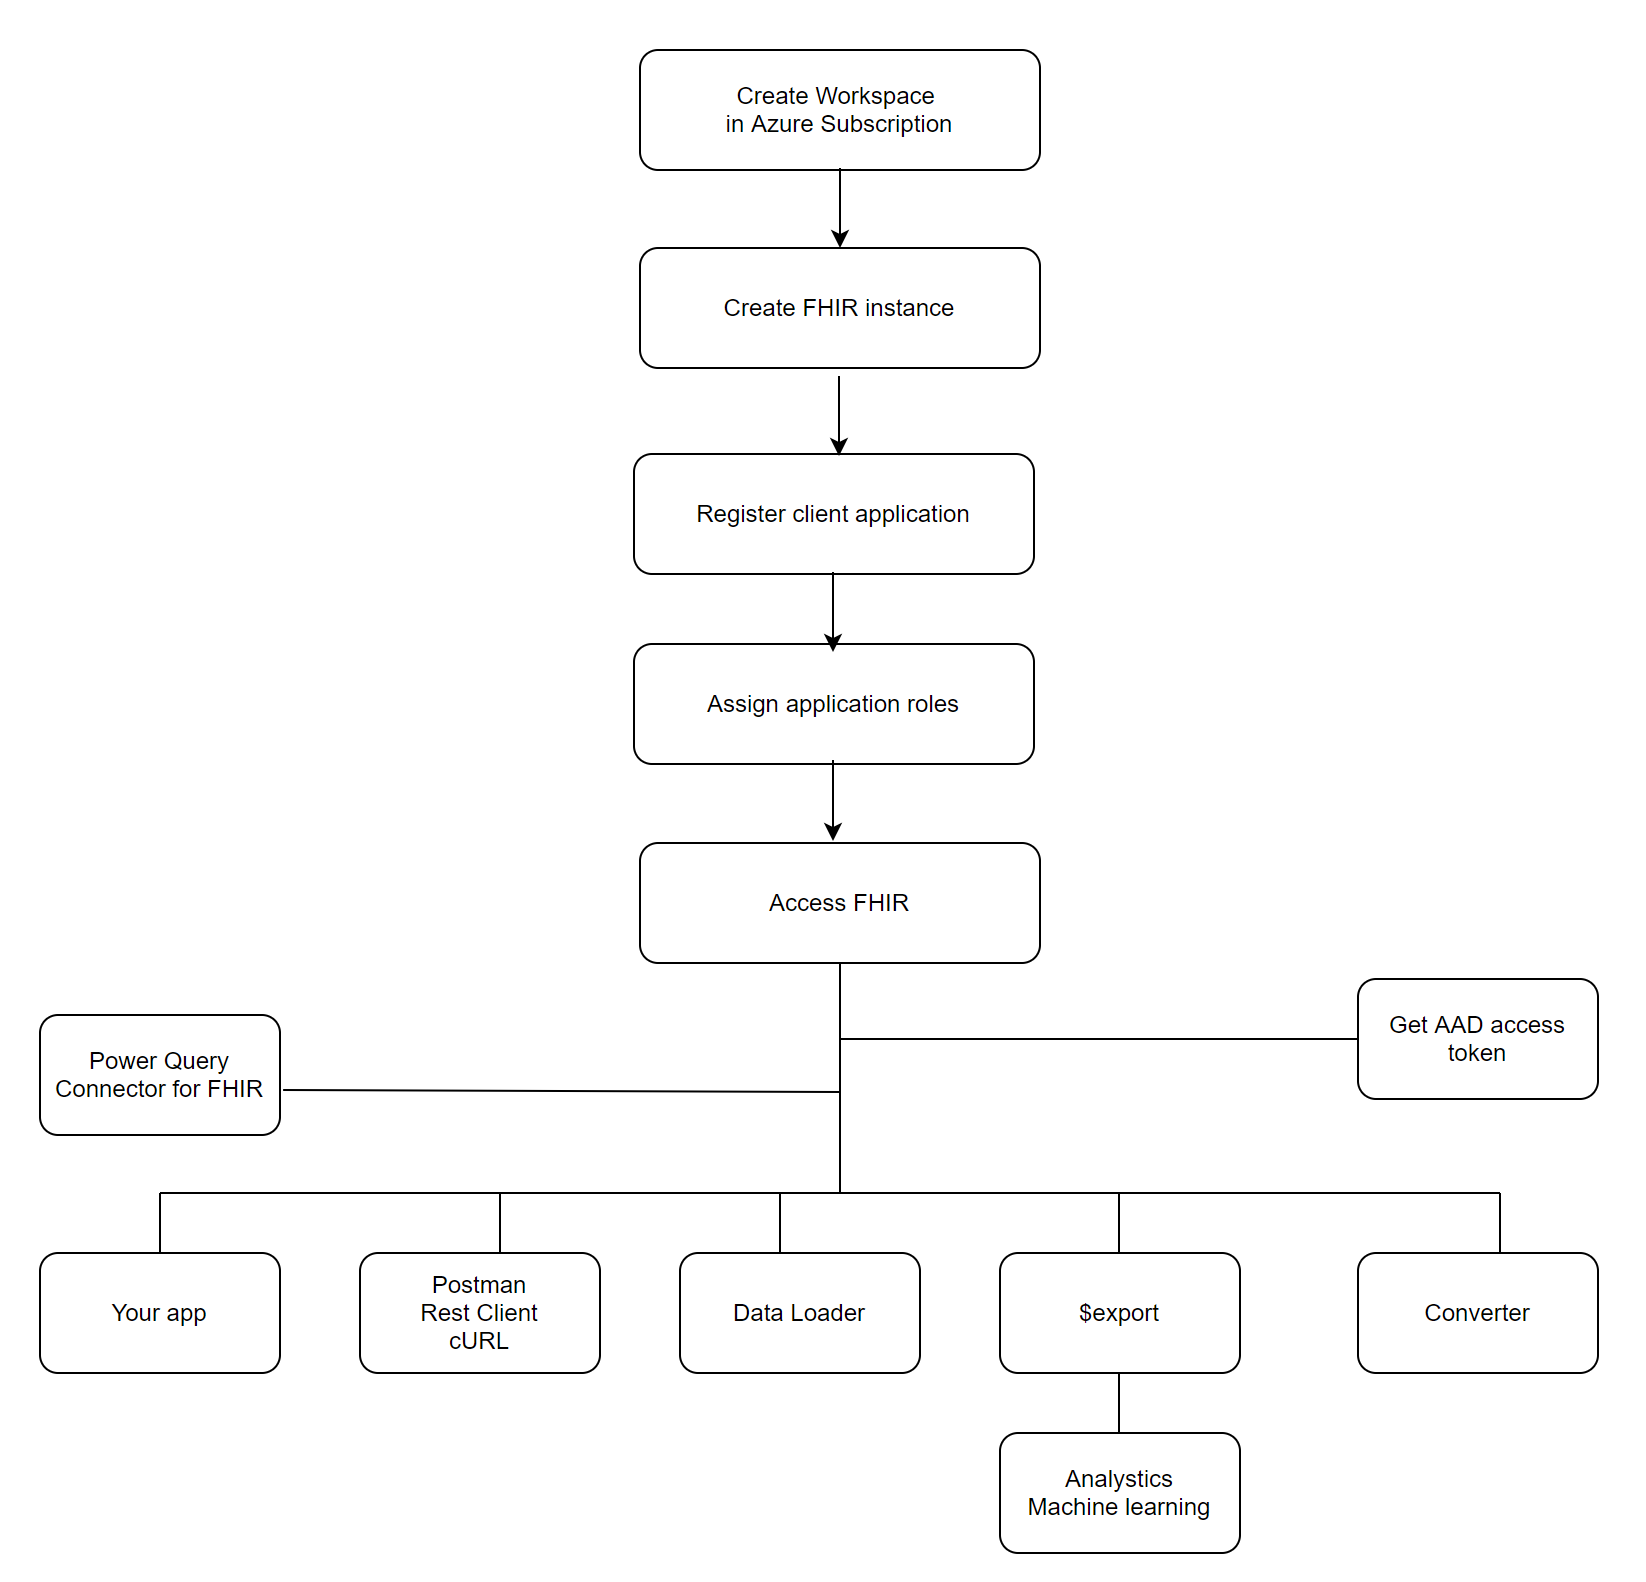 Get started with the FHIR service flow diagram.